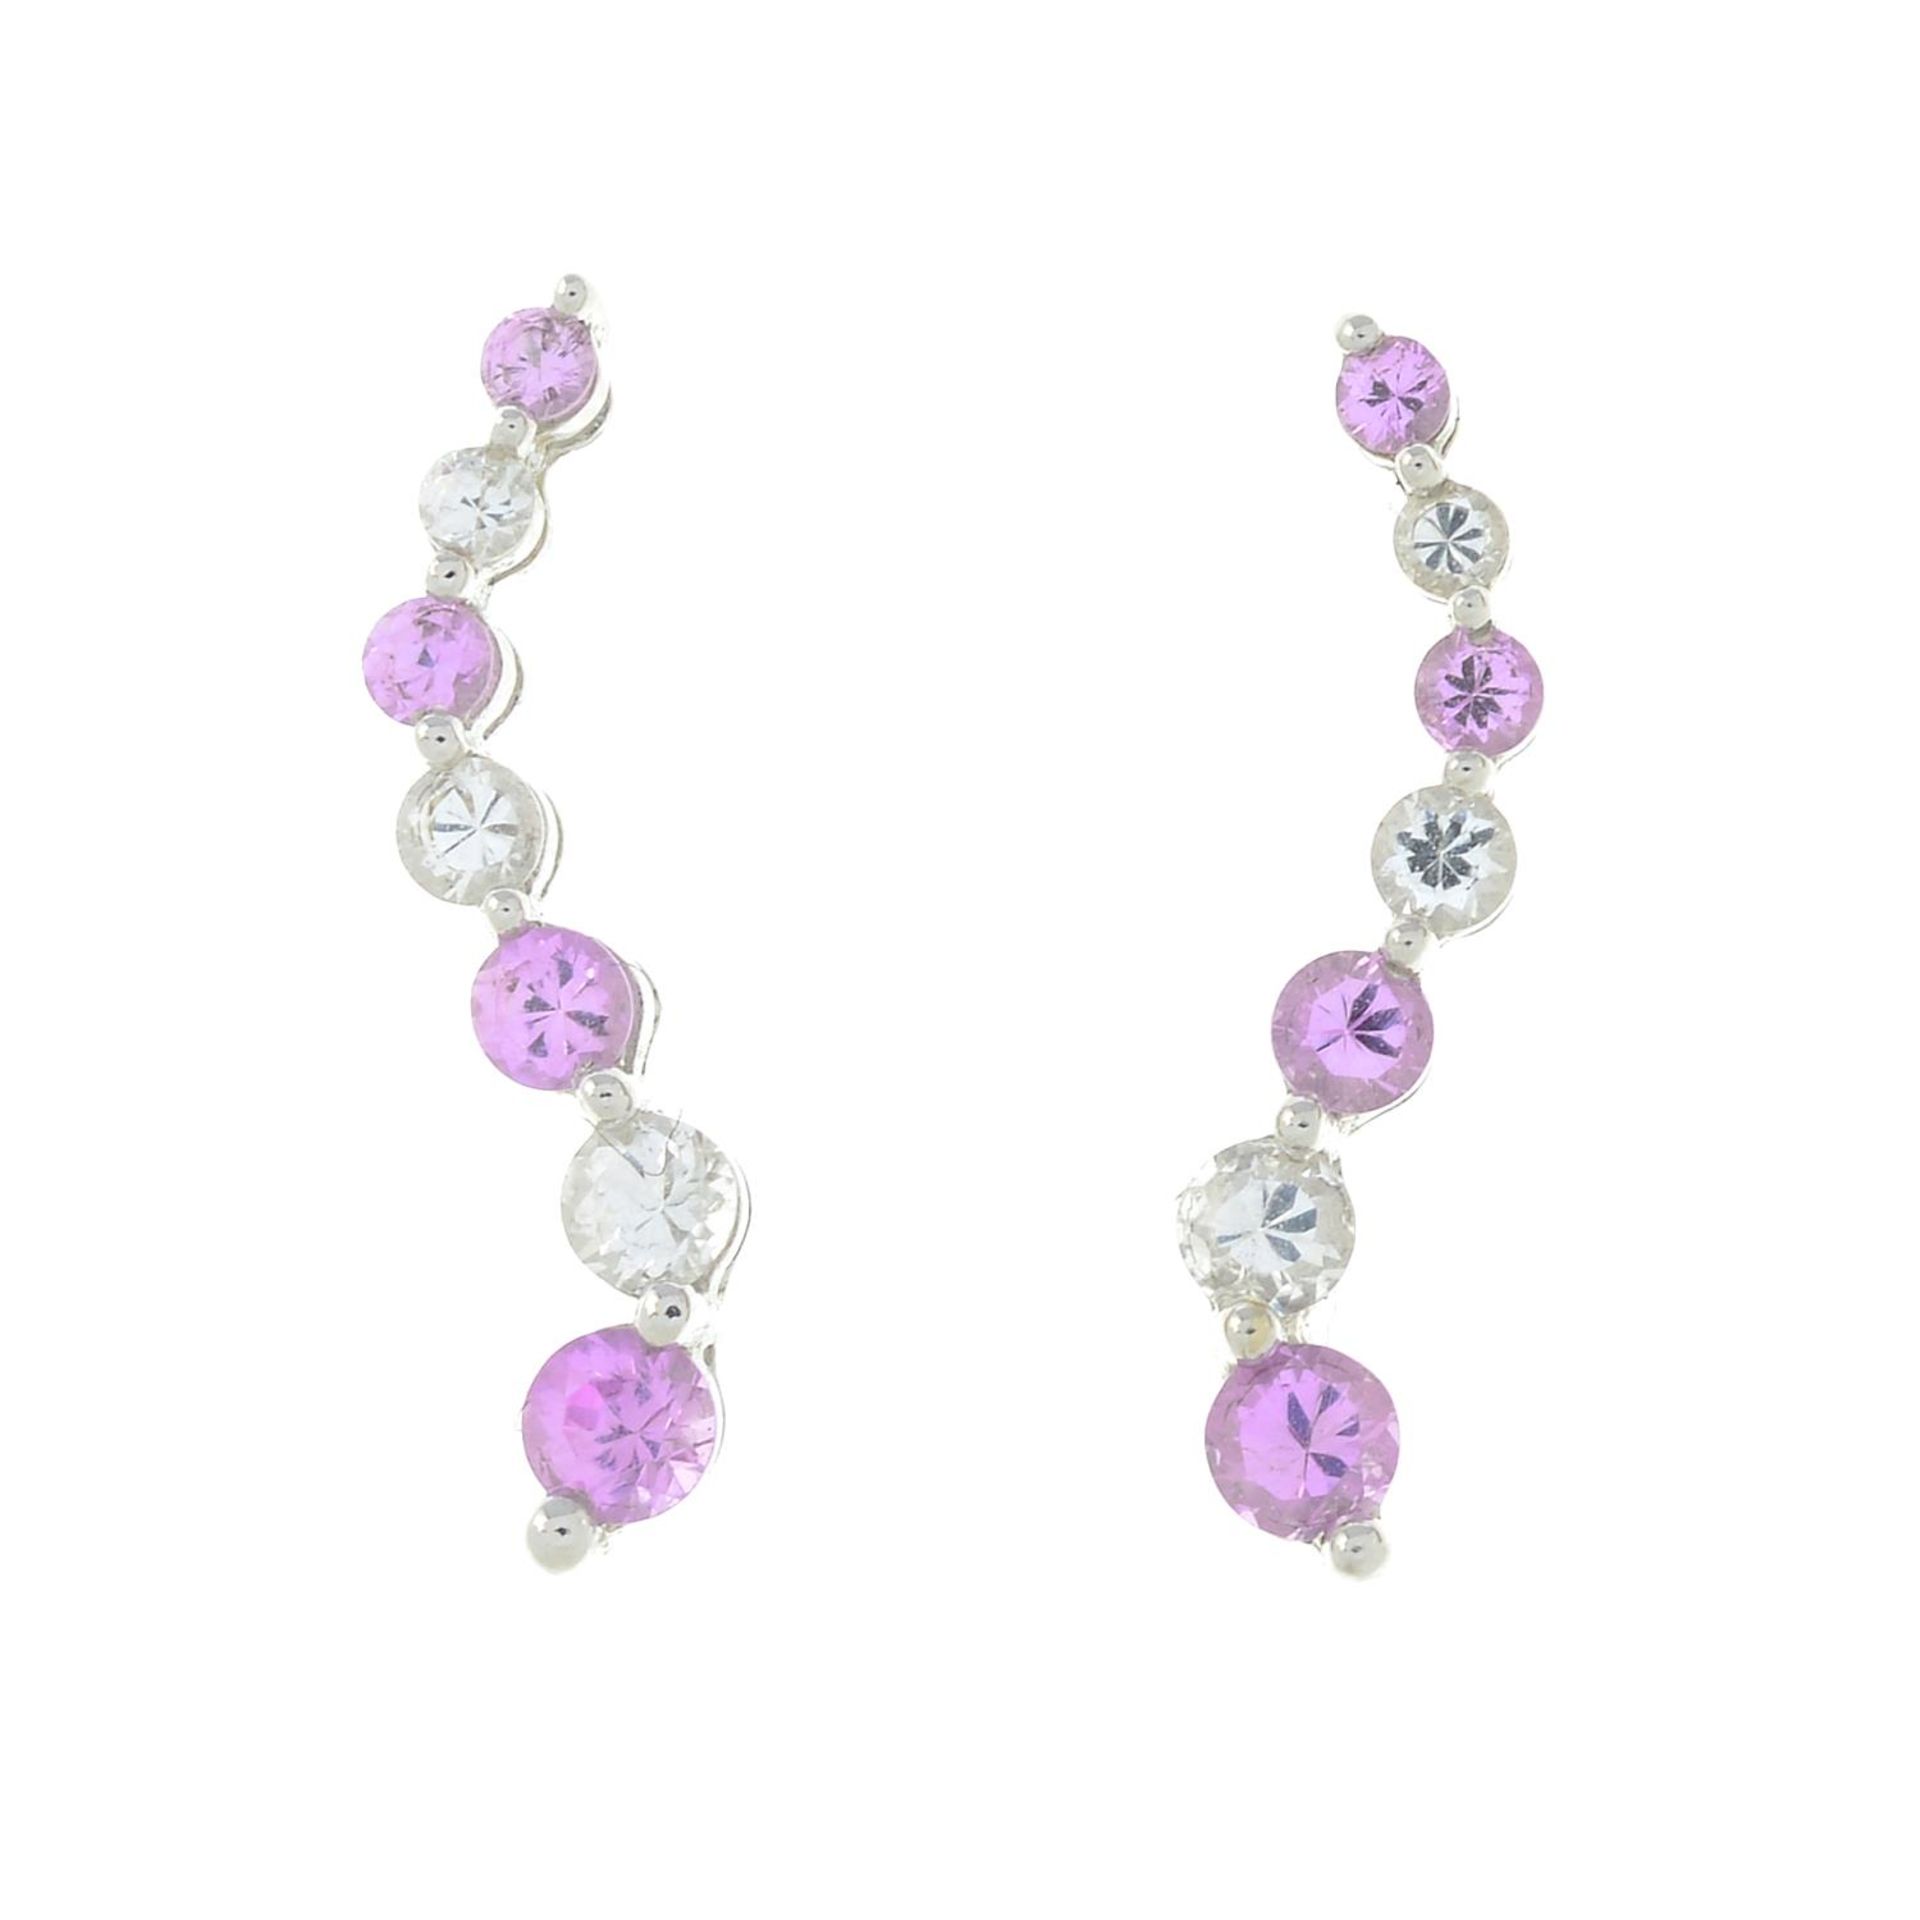 A pair of pink and white sapphire earrings,